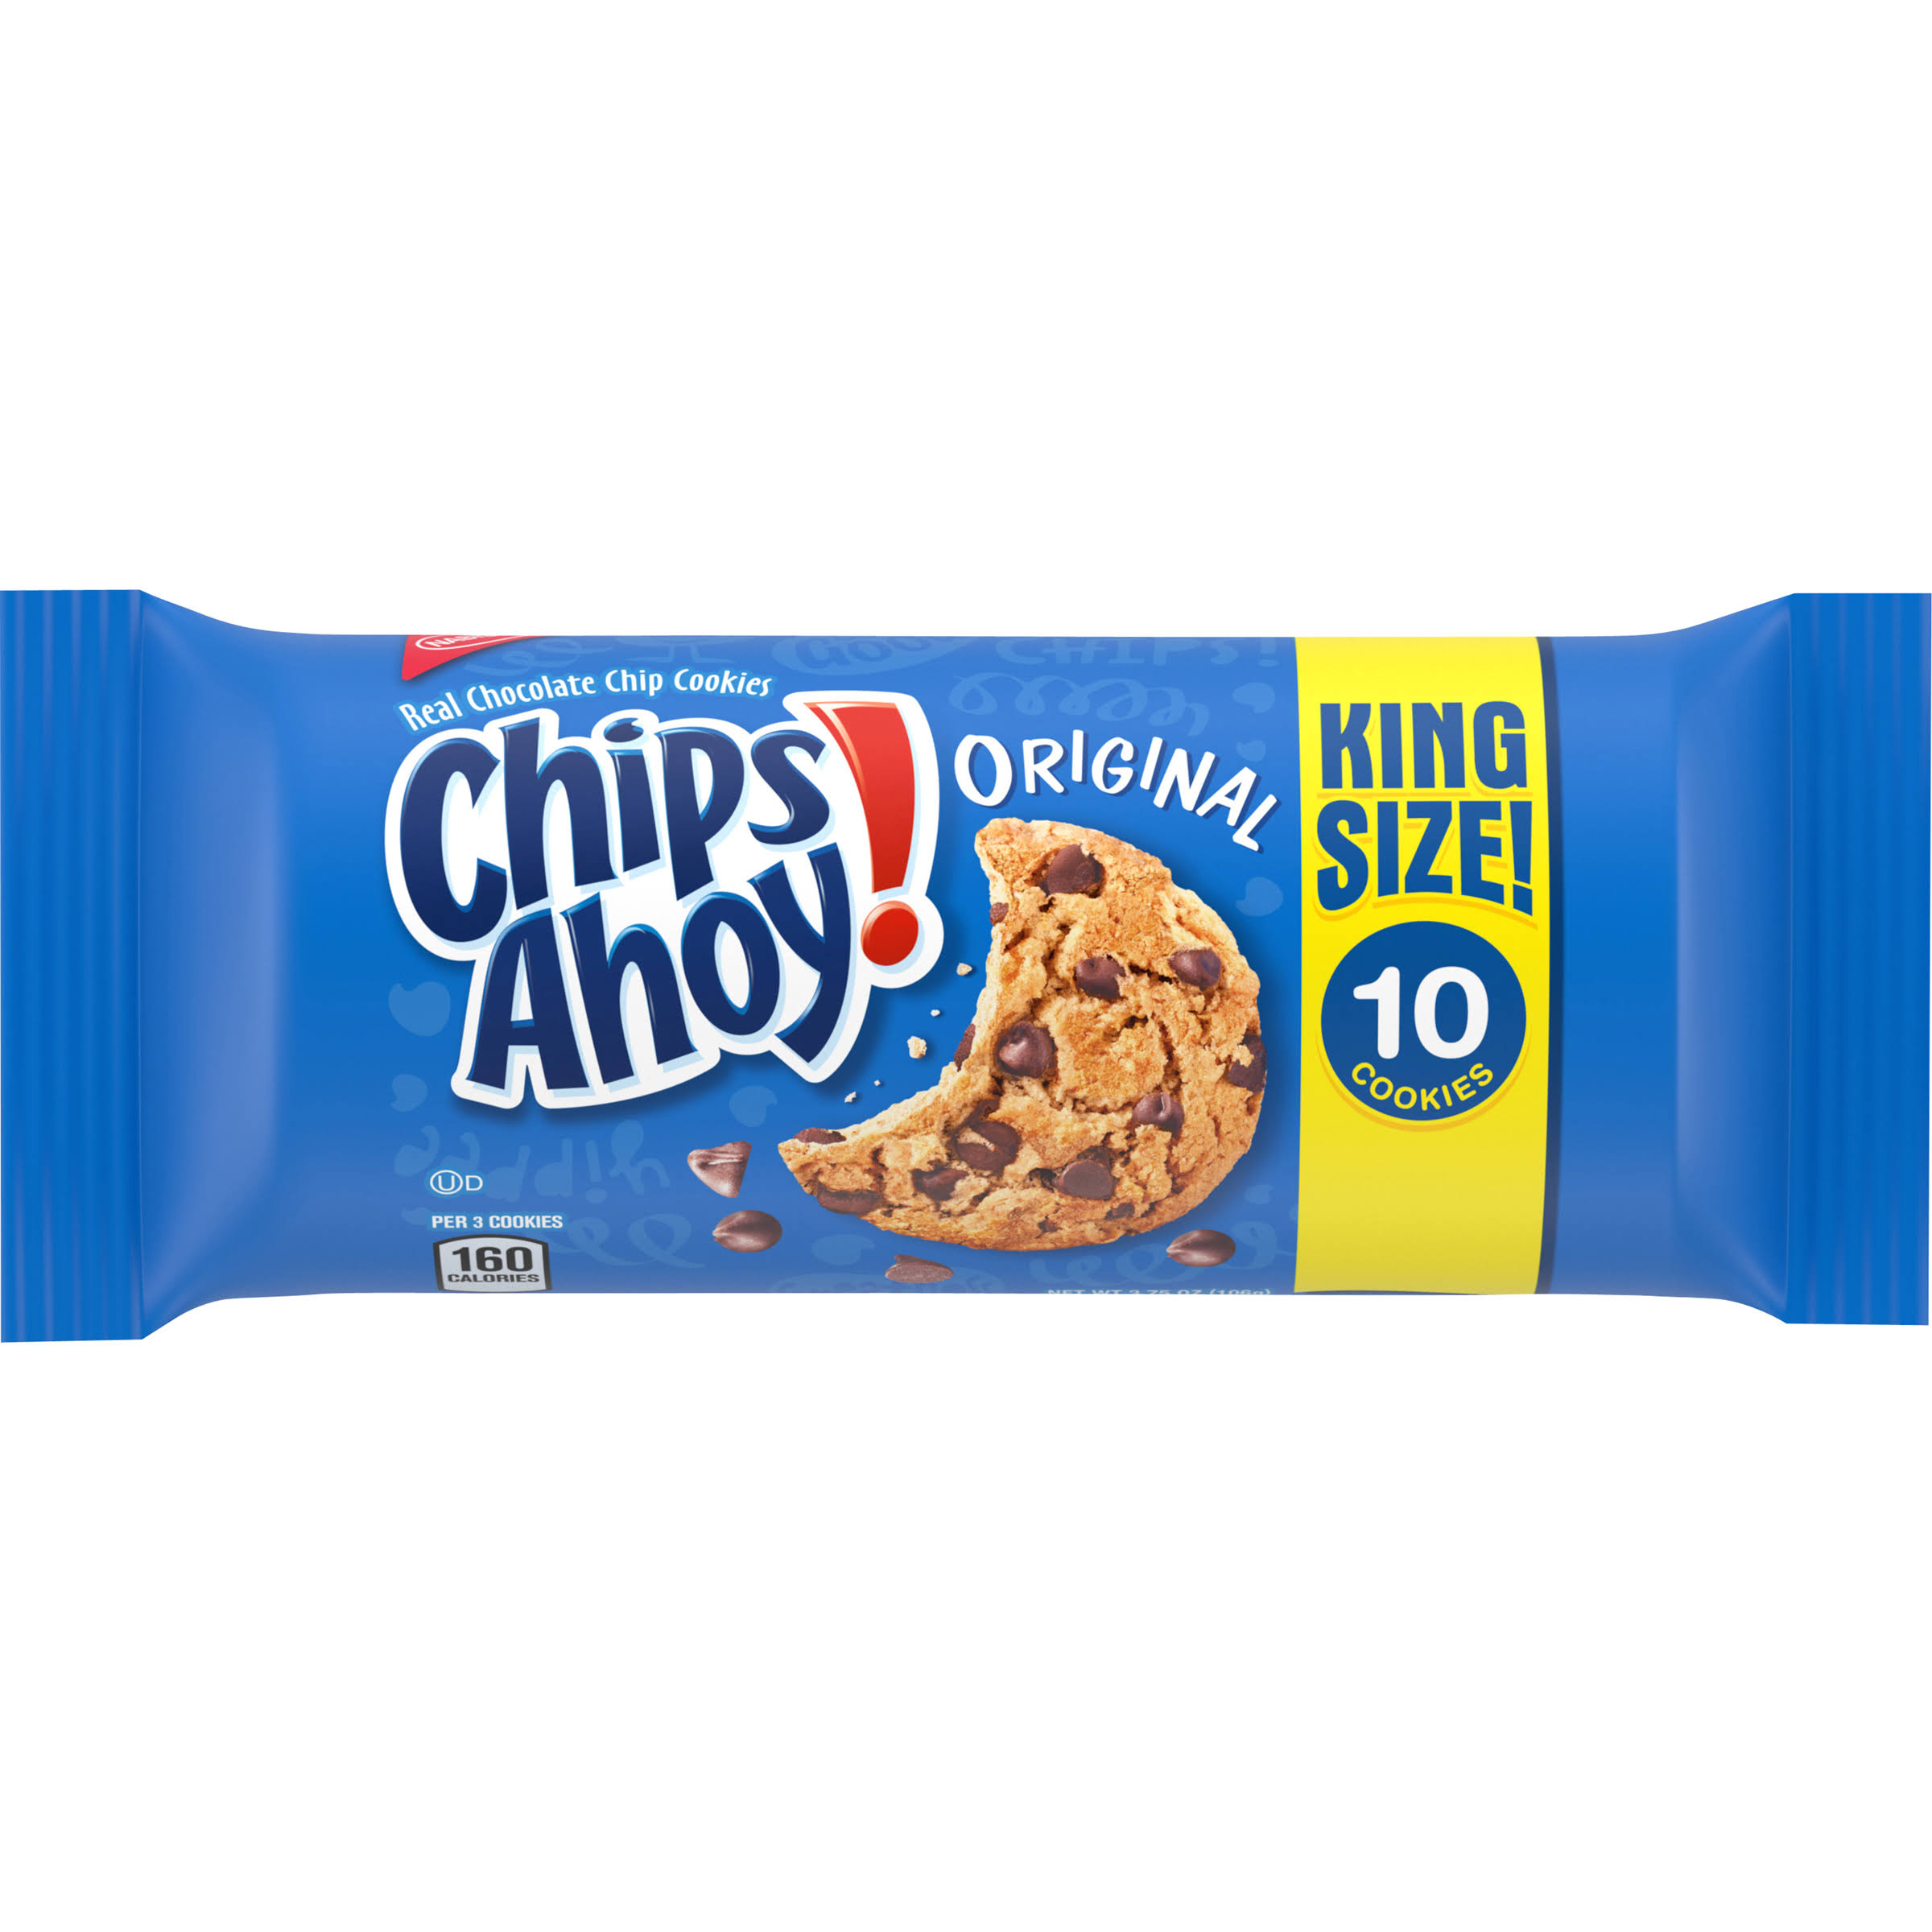 Chips Ahoy Cookies, Chocolate Chip, Original, King Size - 3.75 oz